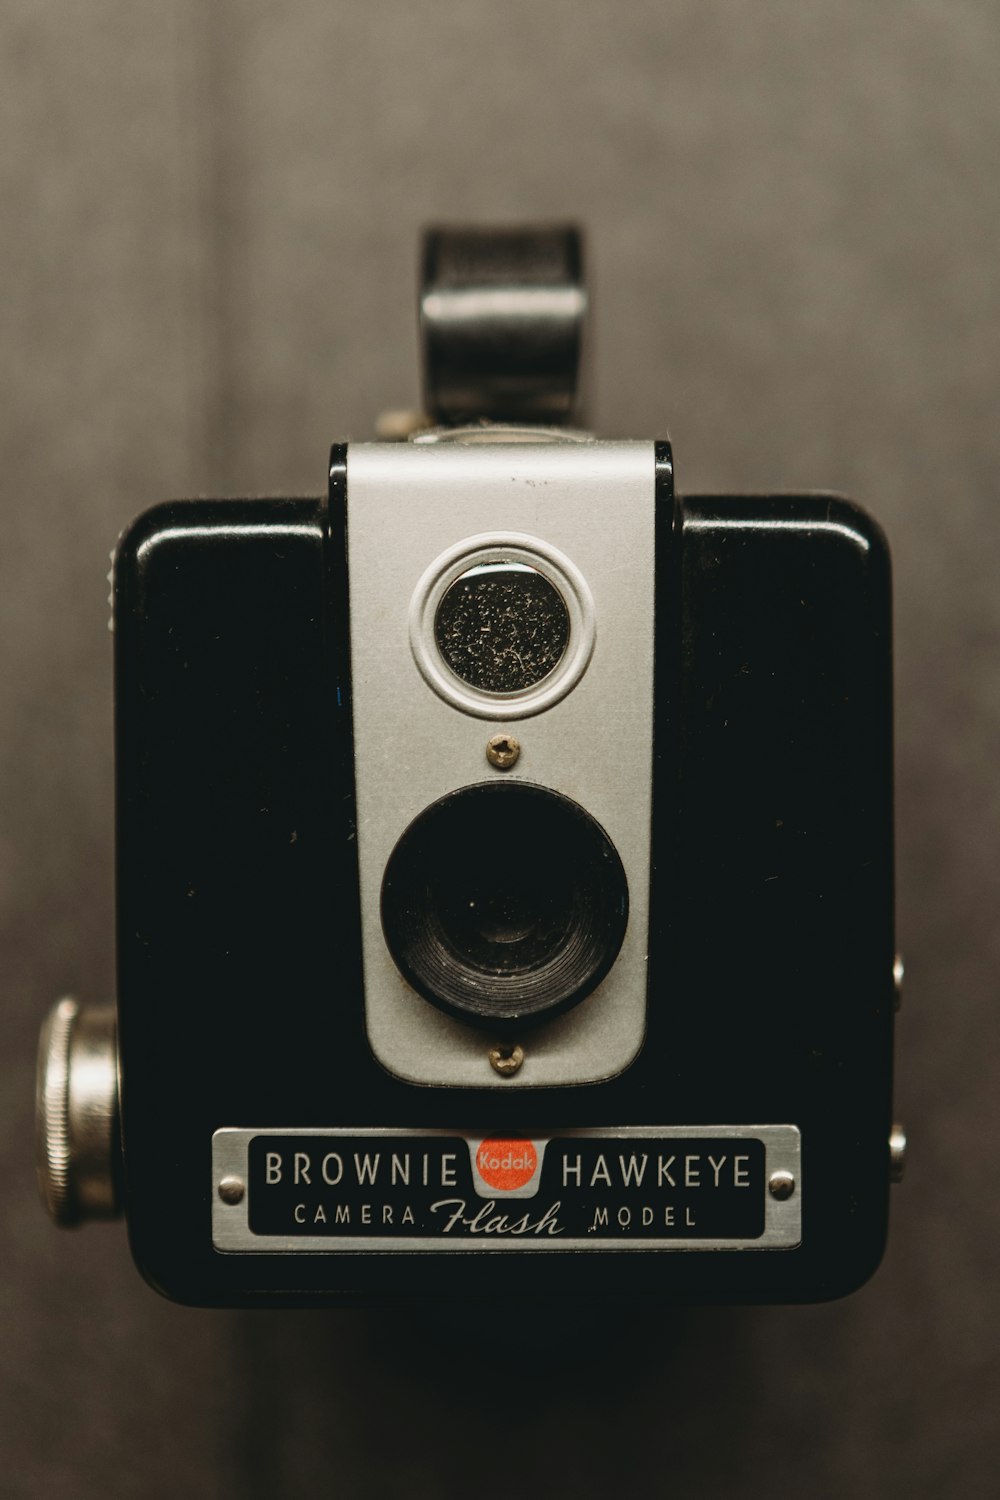 a close up of a camera with a brownie hawkey logo on it